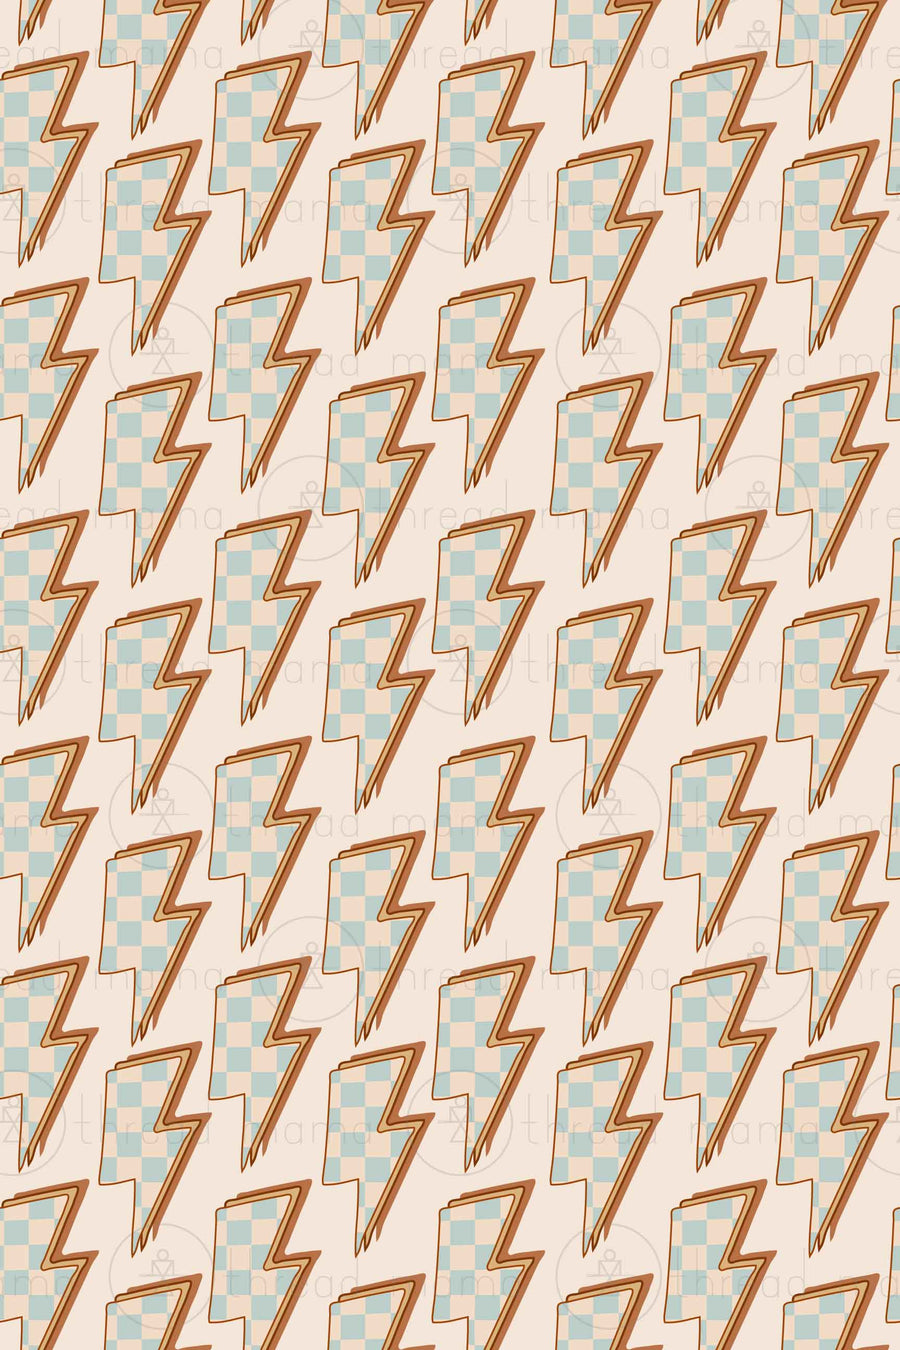 Repeating Pattern 117 (Seamless)